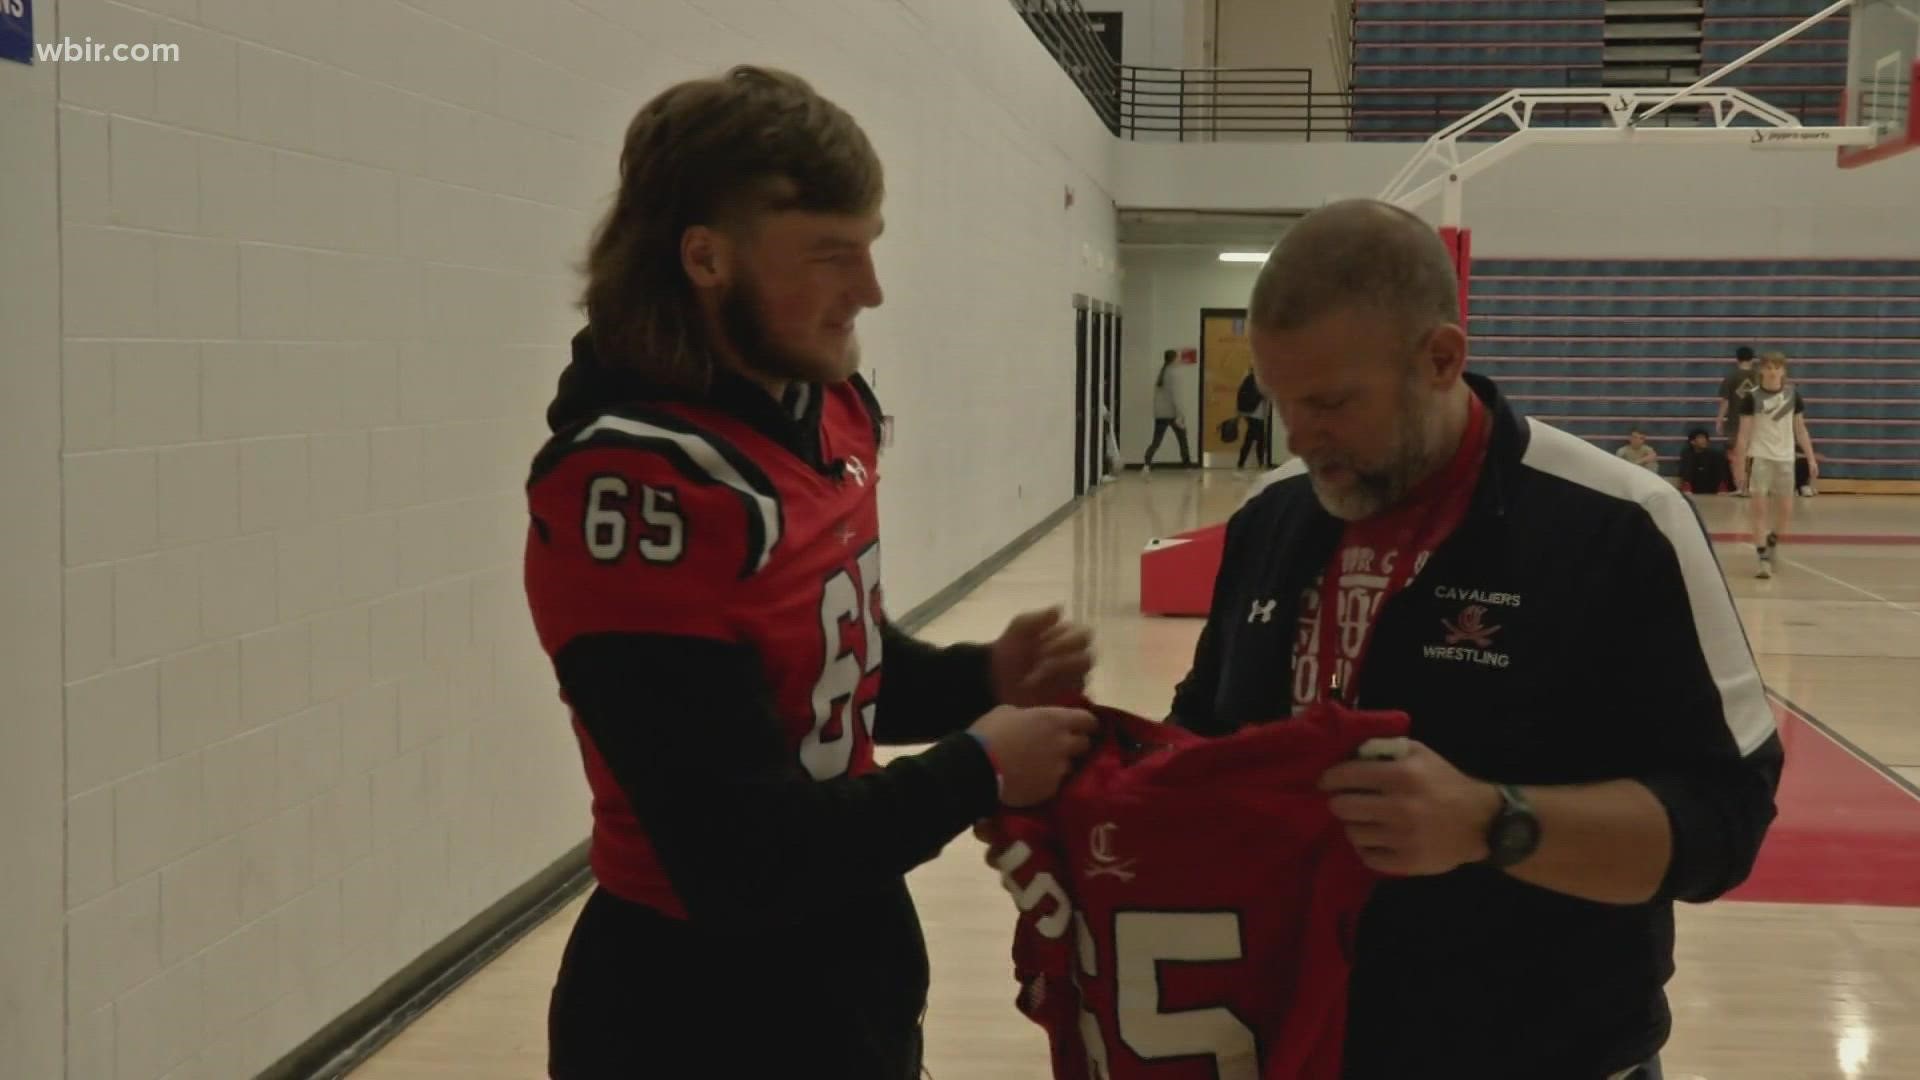 A new tradition at Cookeville High School involves student-athletes giving teachers their jerseys. It's called 'My Jersey, Our Journey.'